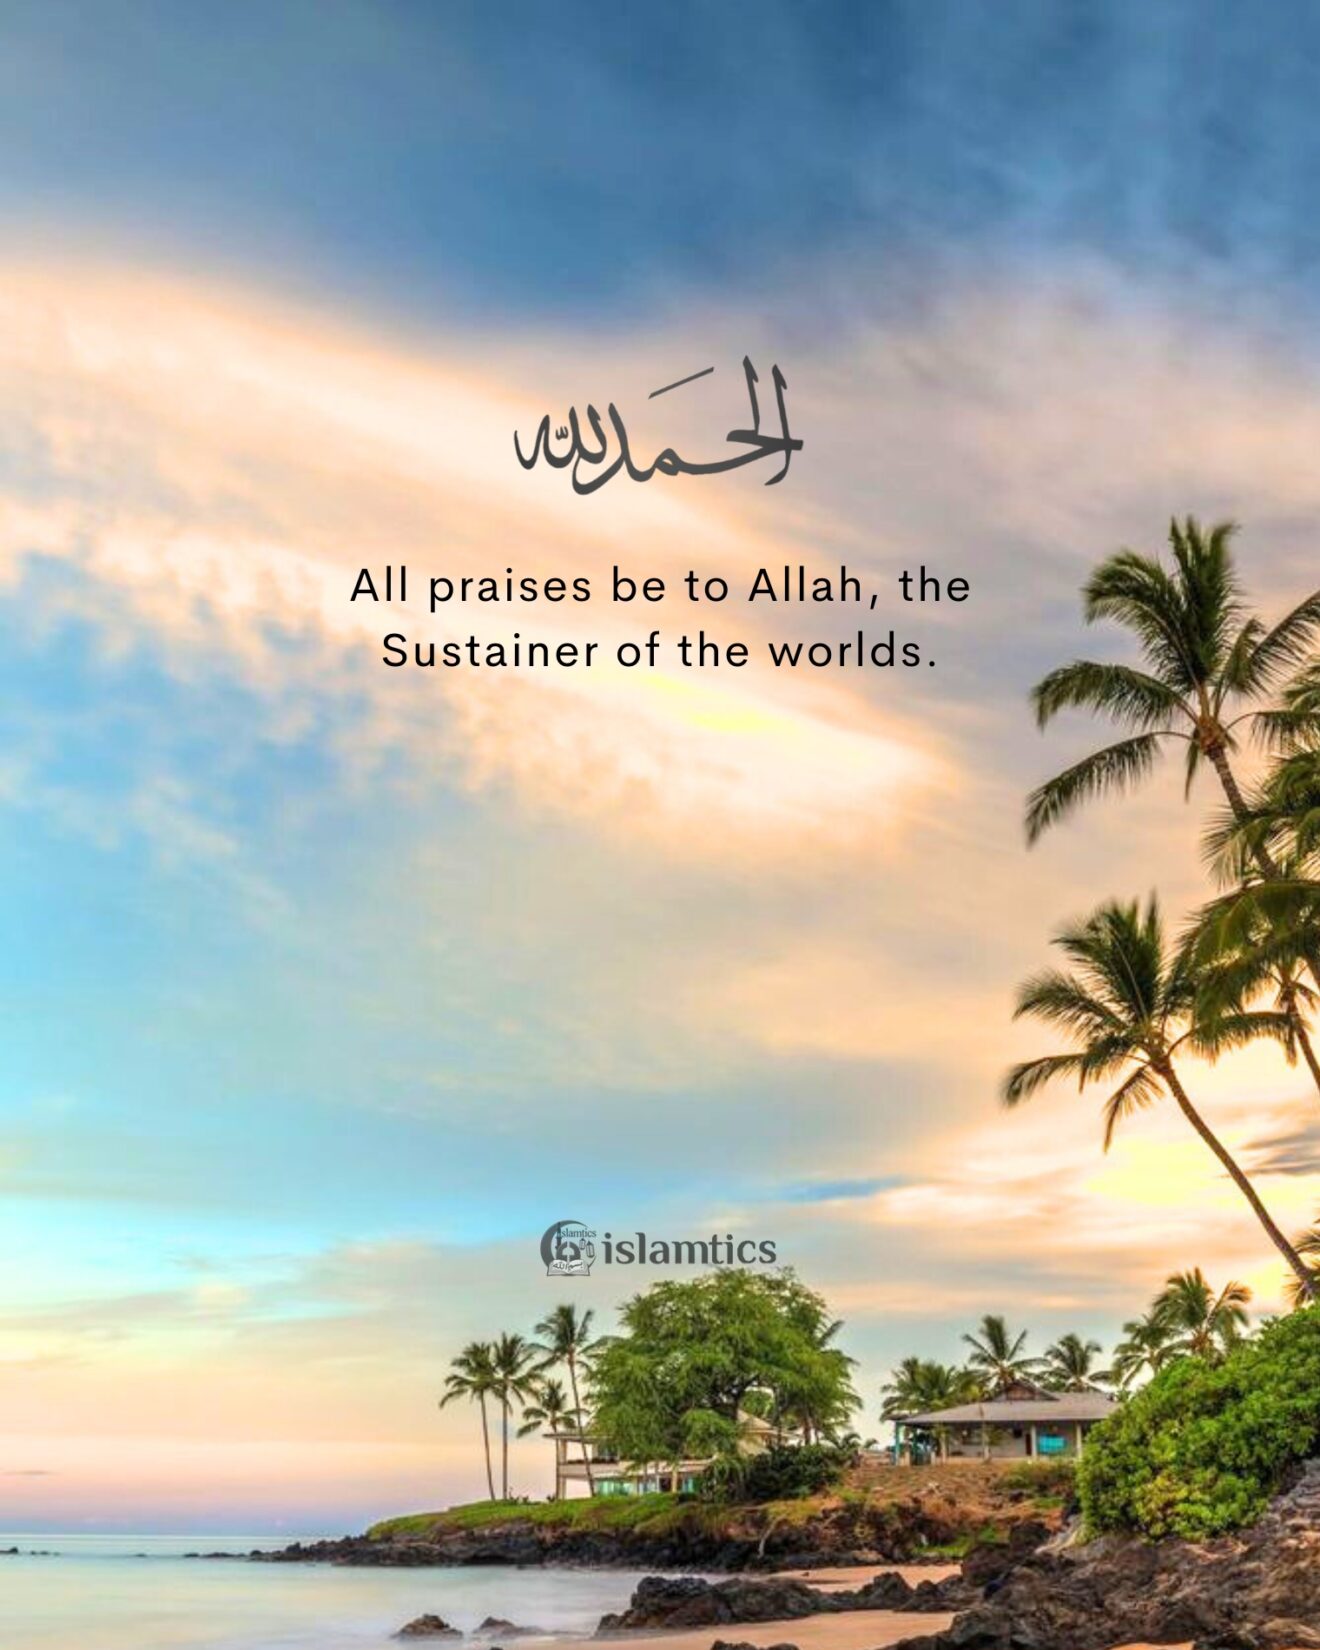 All praises be to Allah, the Cherisher and Sustainer of the worlds.